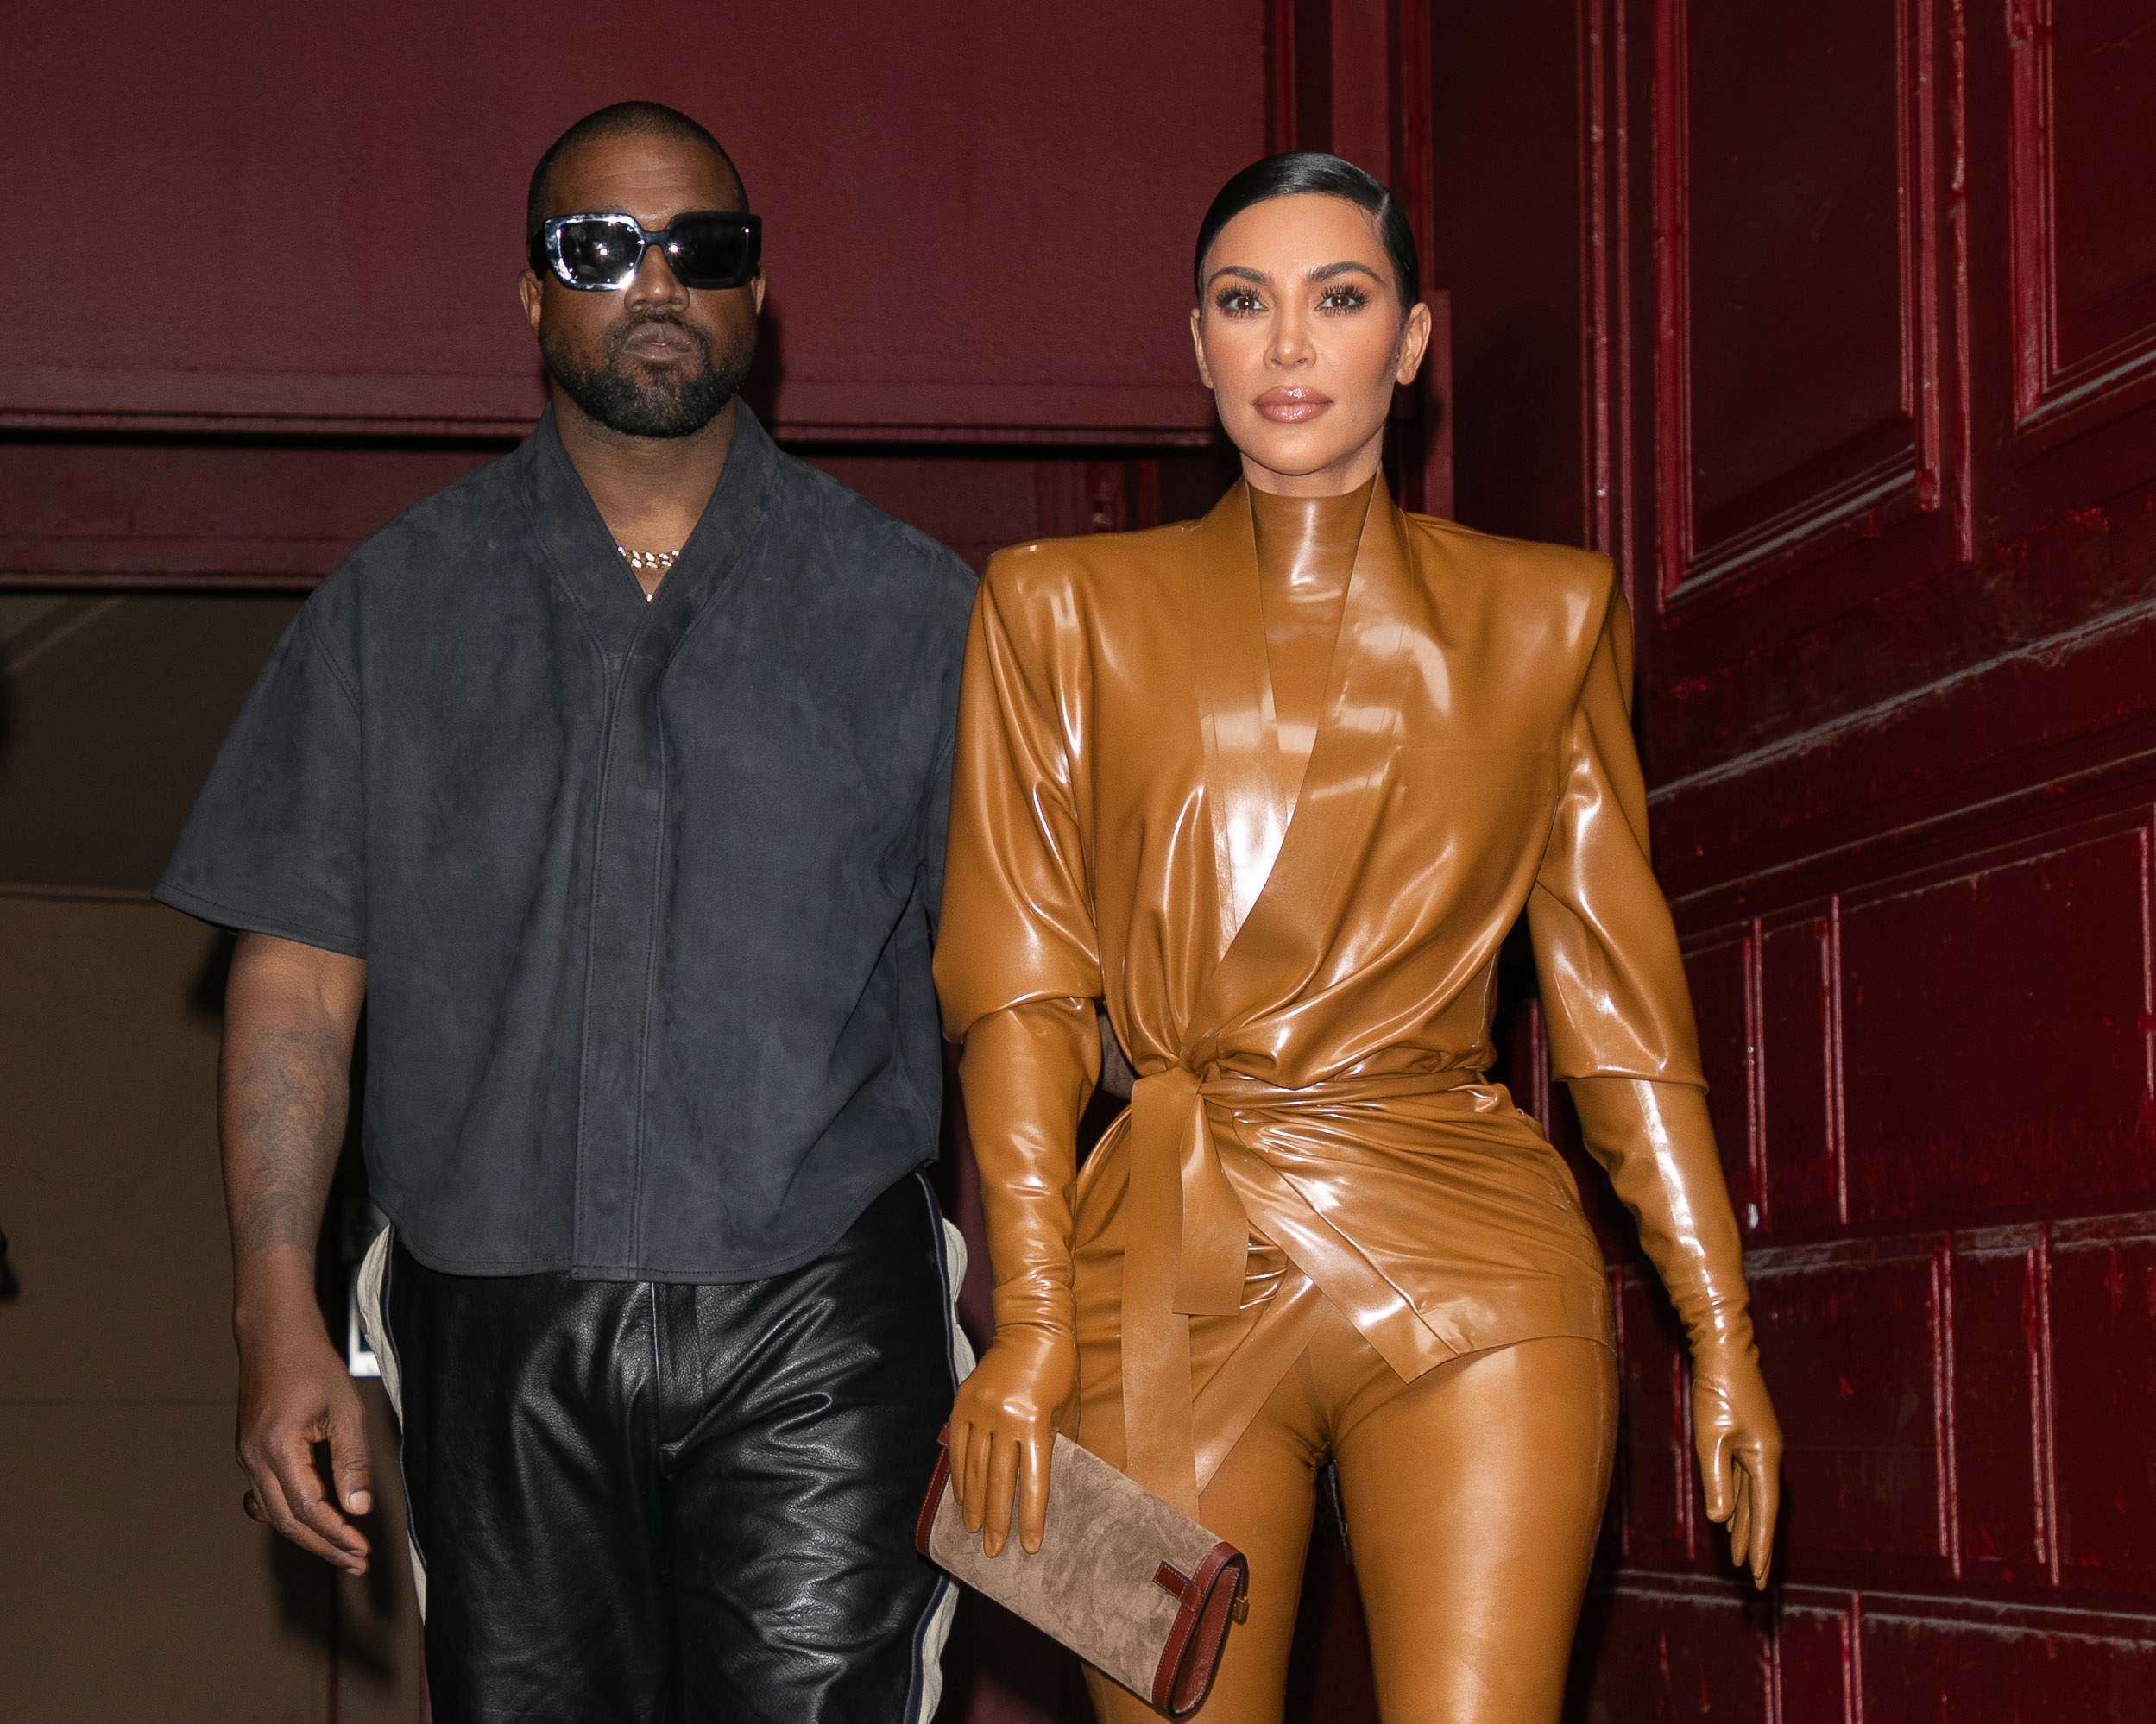 Kanye and Kim walking in a building during happier times